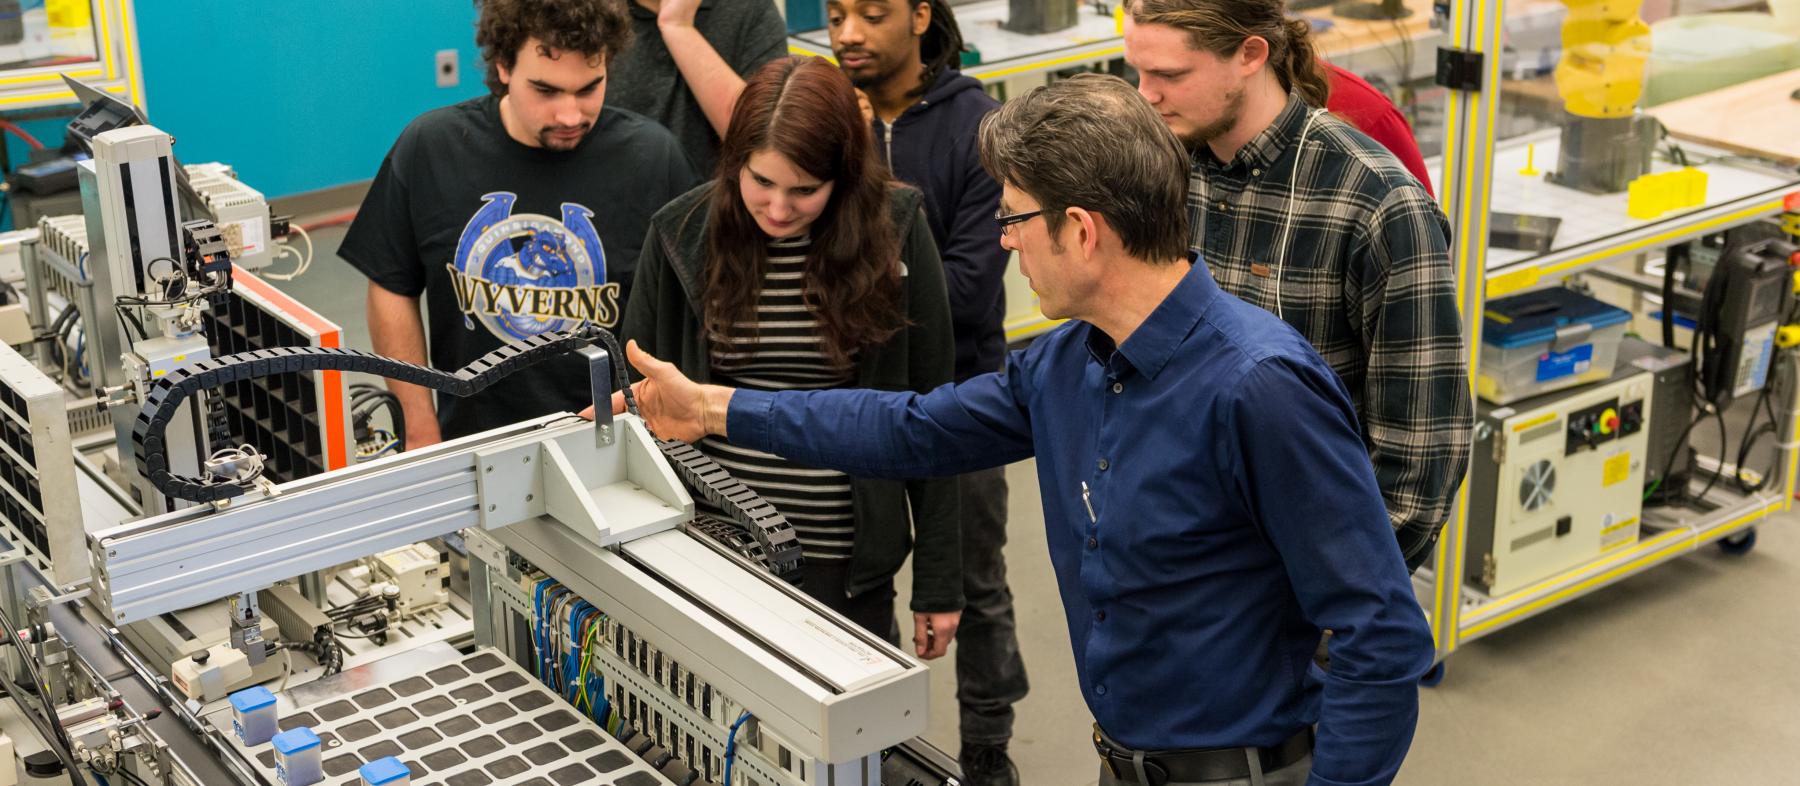 A professor shows advance manufacturing equipment to a class